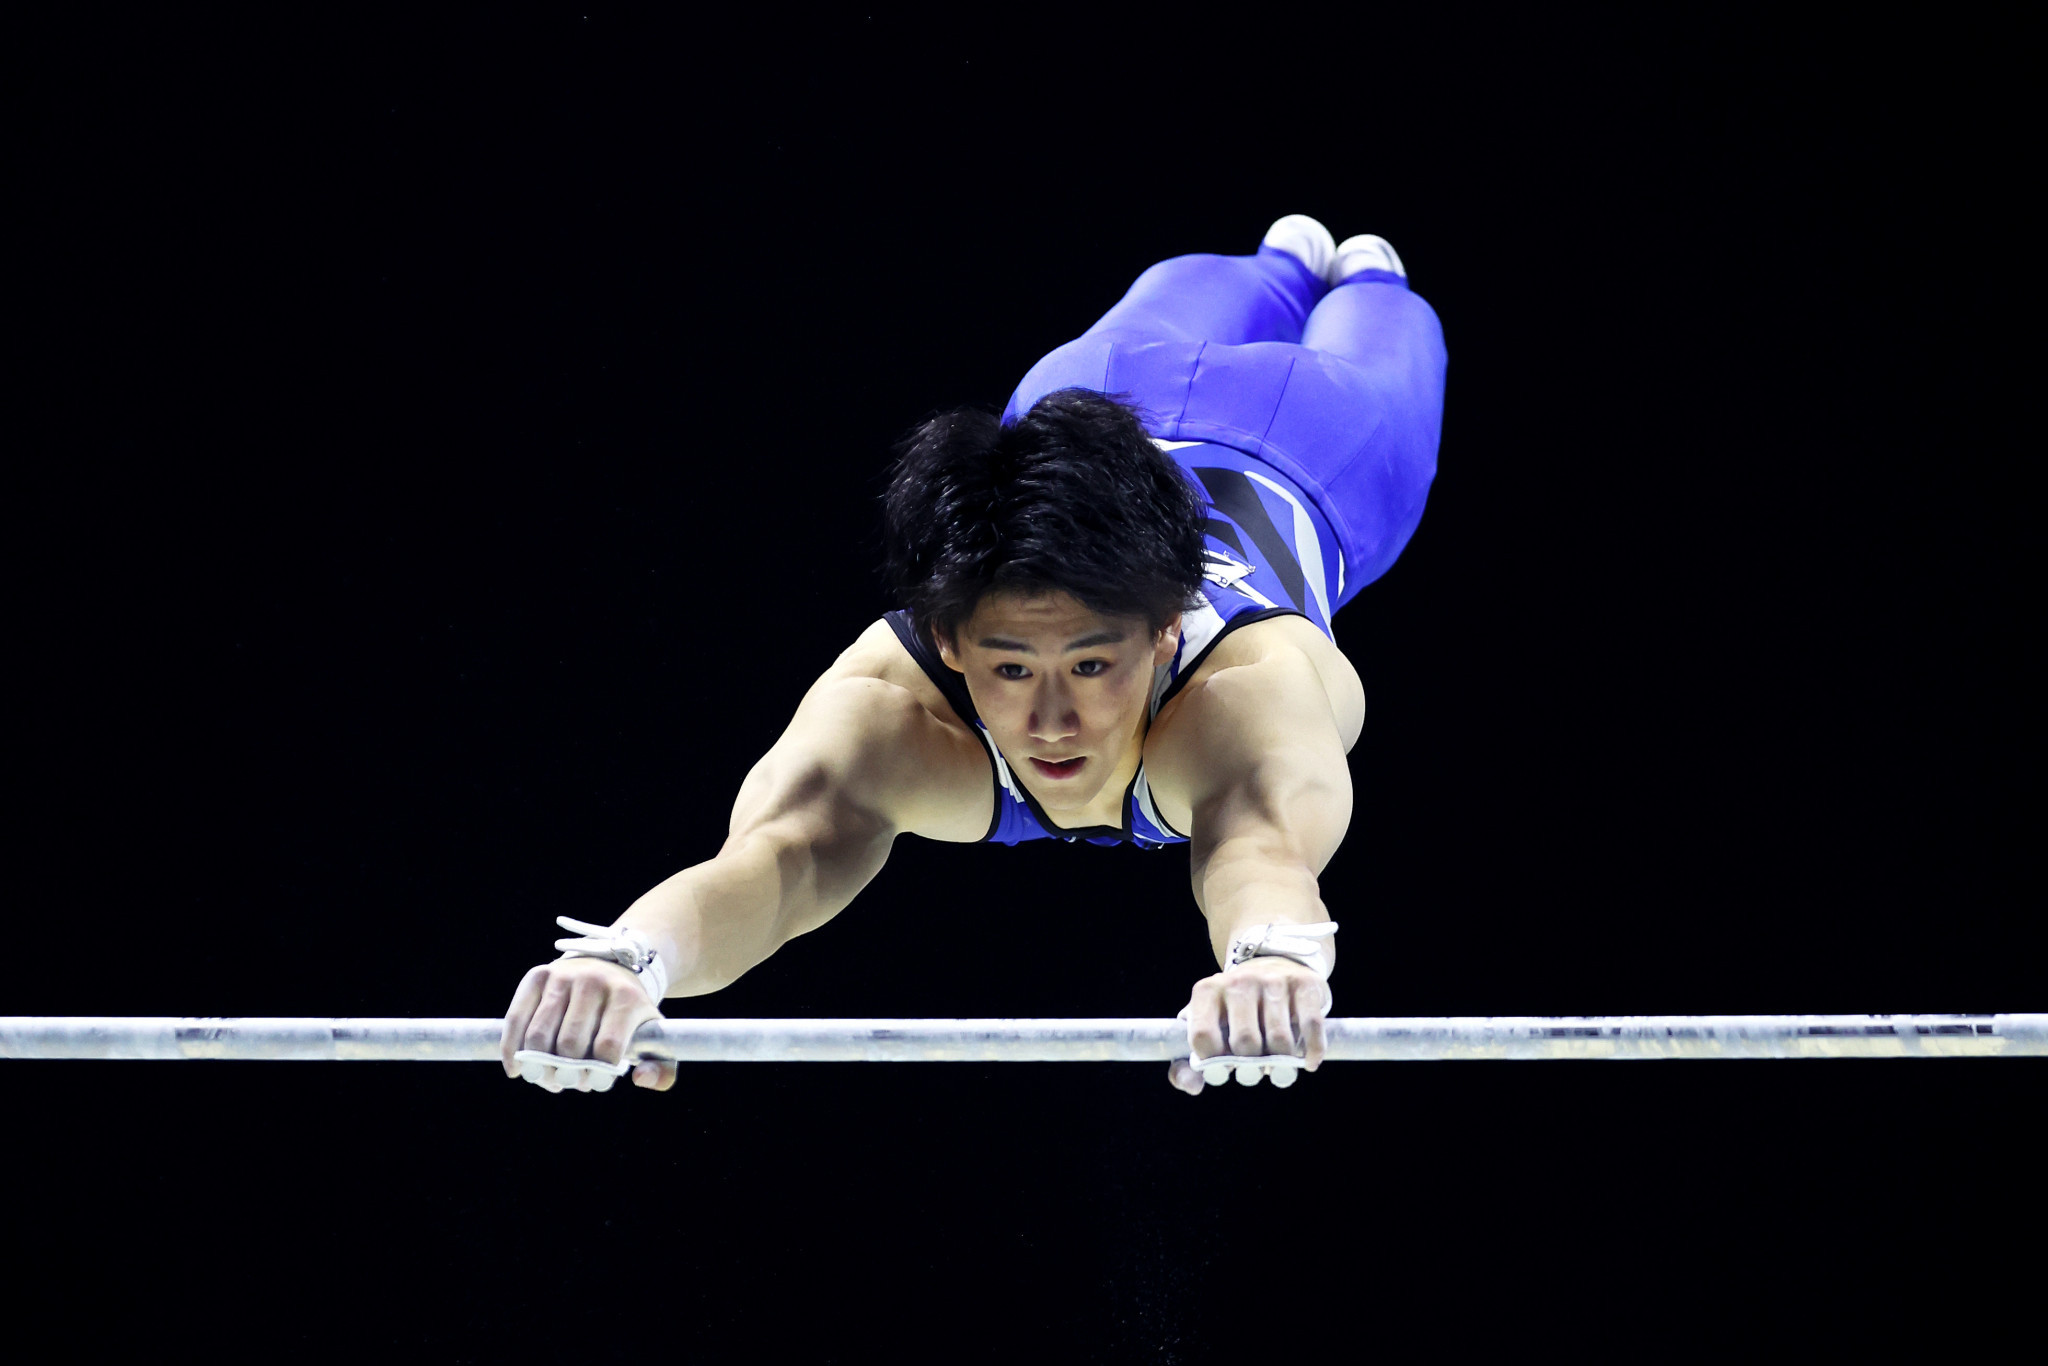 Olympic champions lead the way in men's qualifying at Artistic Gymnastics World Championships